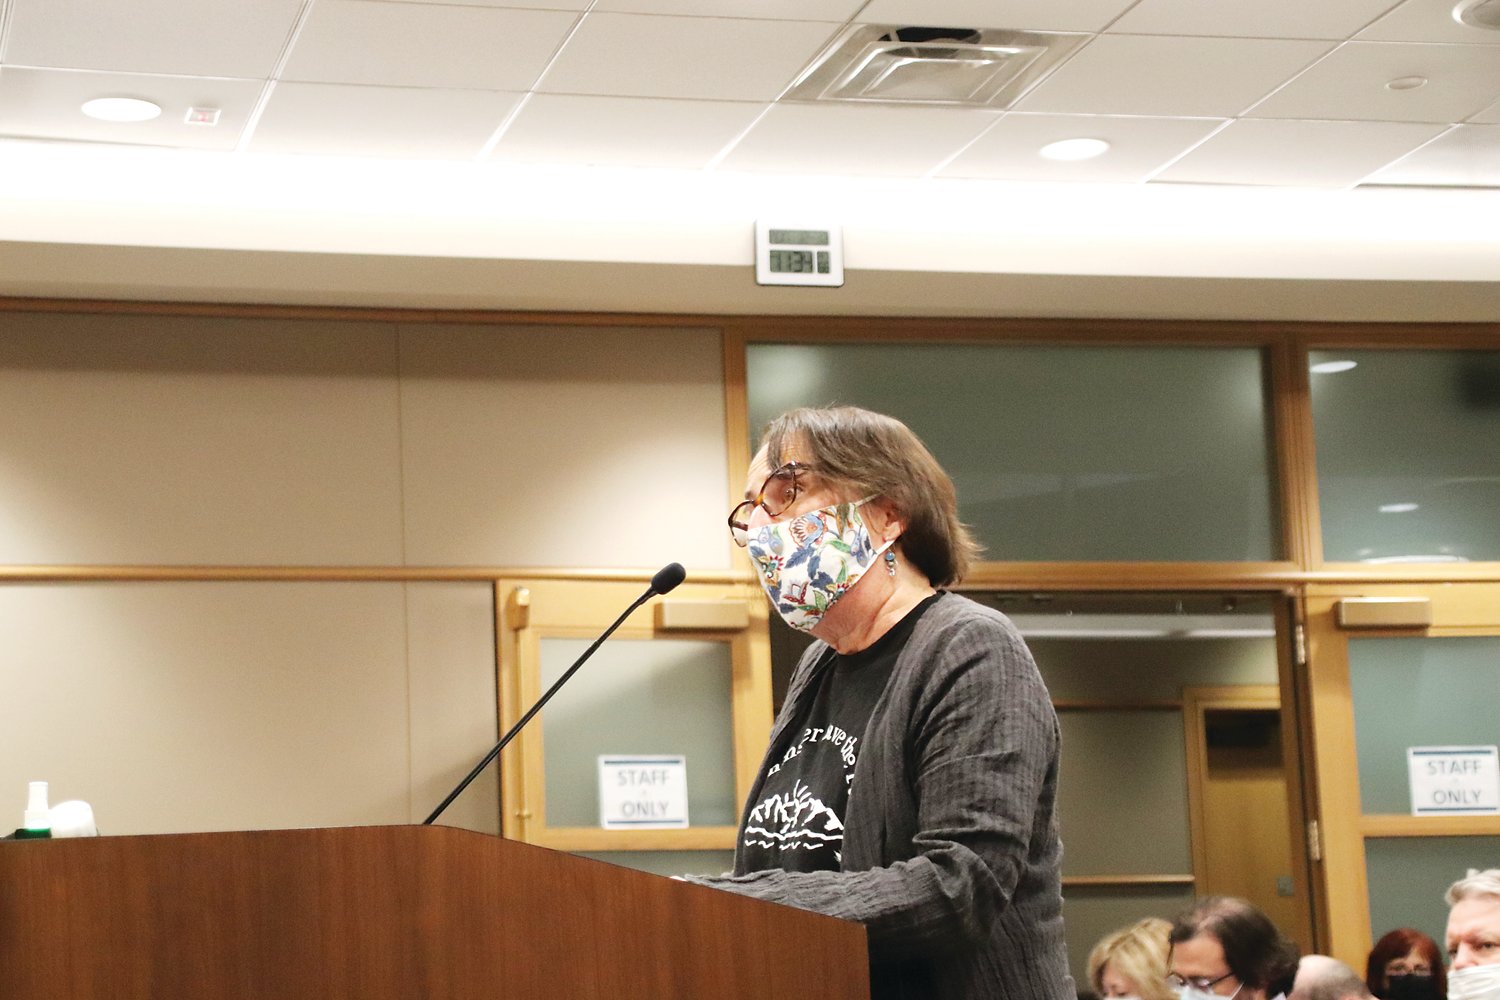 Karen Ray, a leader of the Safe the Farm group, testifies at the public hearing.